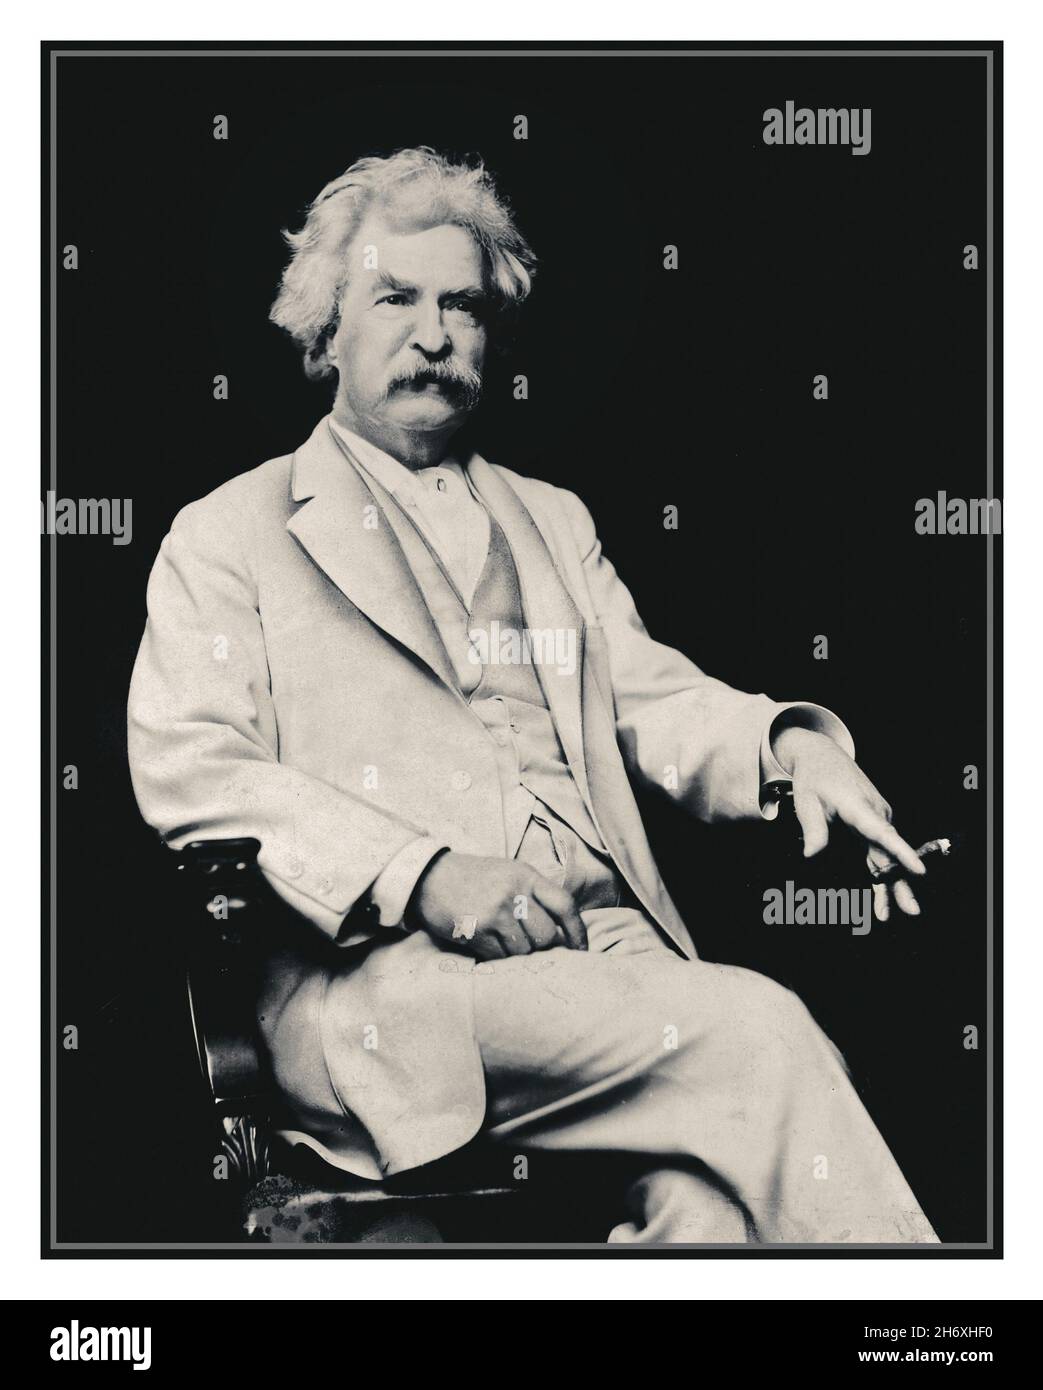 MARK TWAIN Vintage 1900s Archive portrait of Mark Twain, three-quarter length portrait, seated, facing slightly right, with cigar in hand] Date Created/Published: c1907.1 photographic archive print. Stock Photo